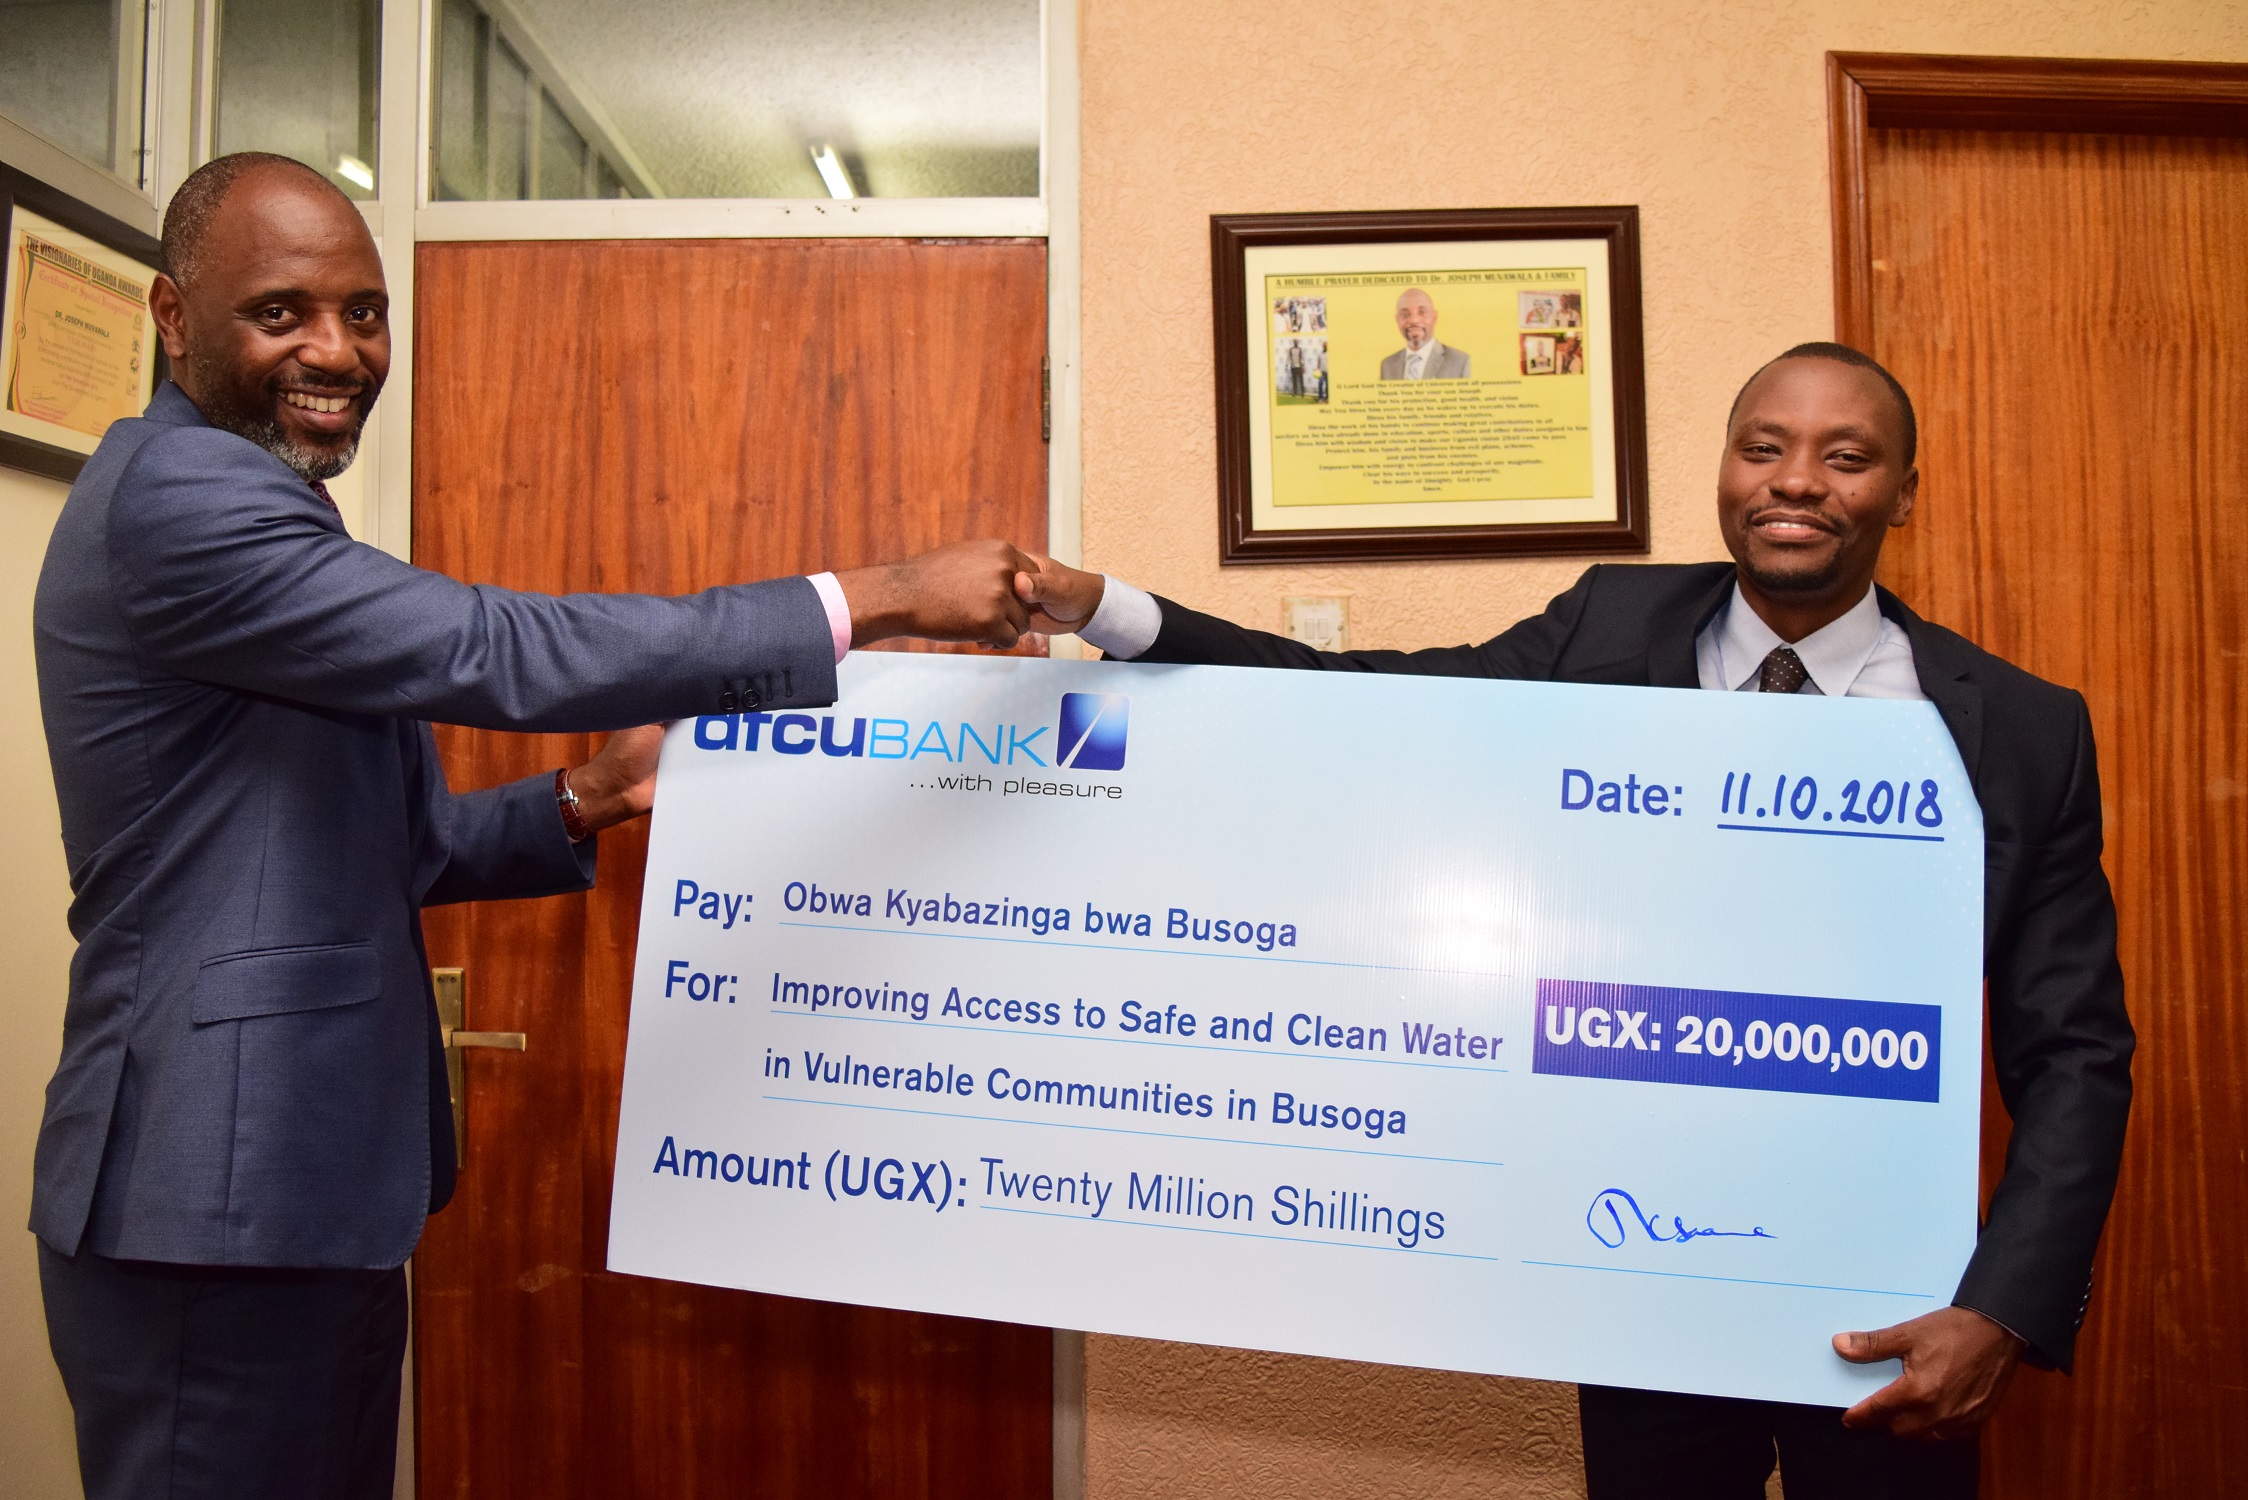 Dfcu Donates Shs 20M Towards Improving Access to Clean Water in Busoga